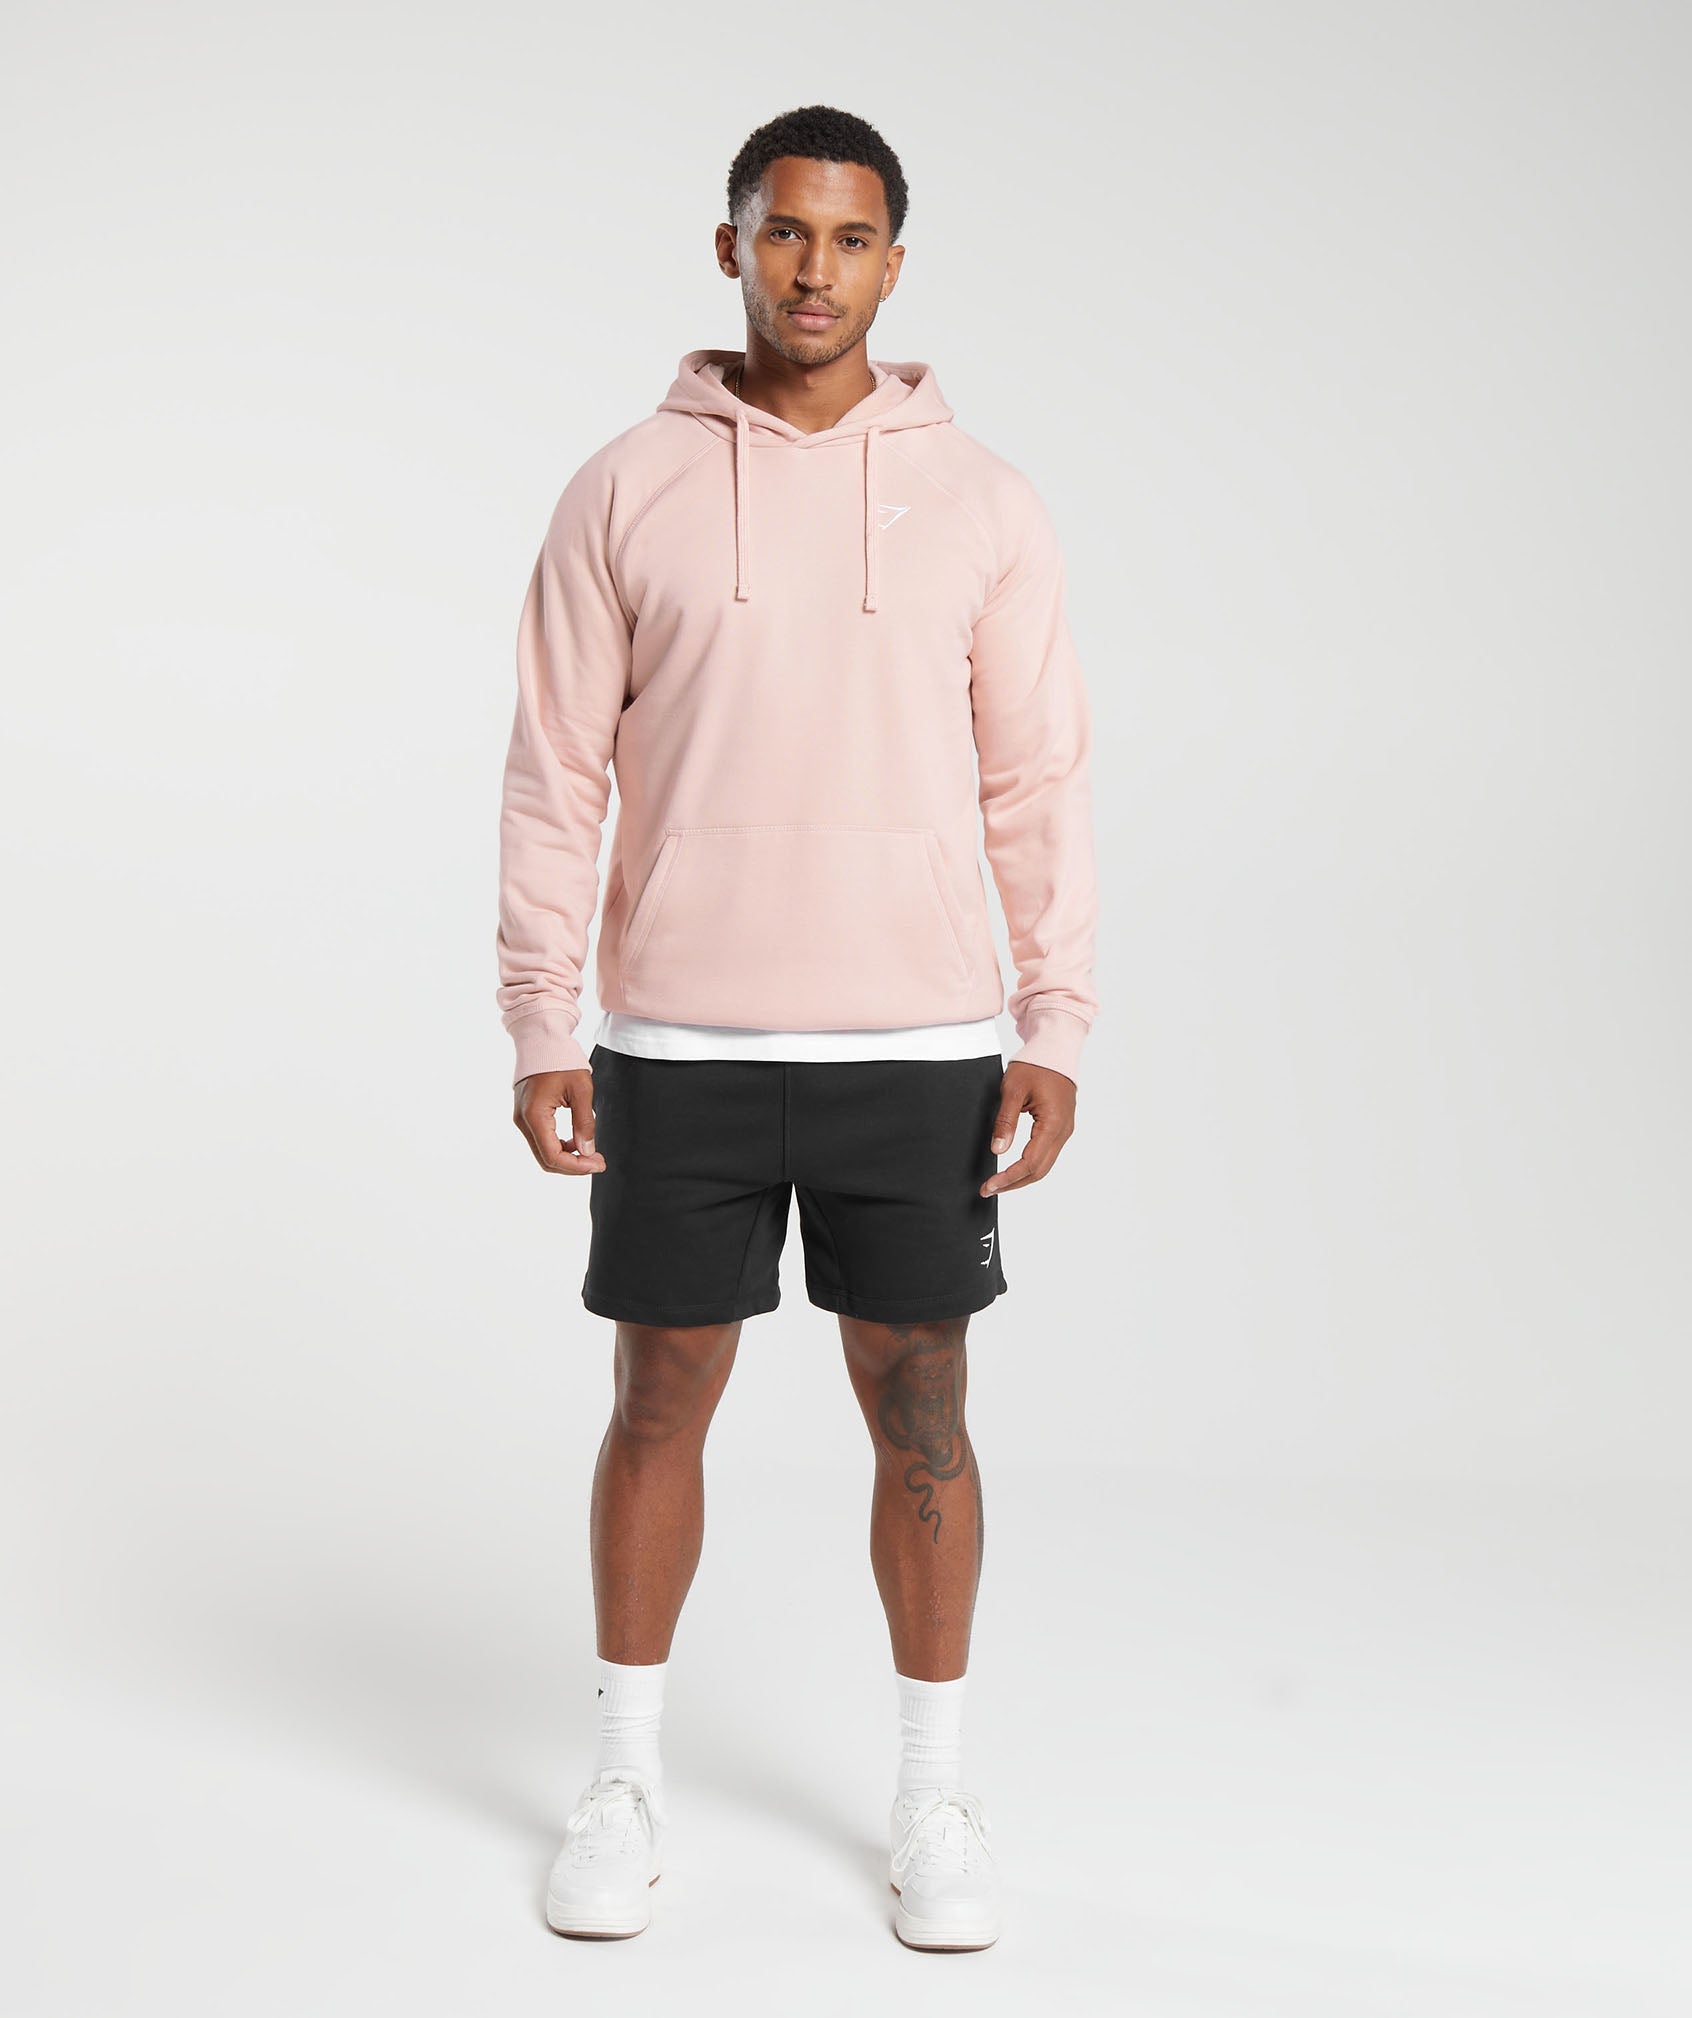 Crest Hoodie in Misty Pink - view 4